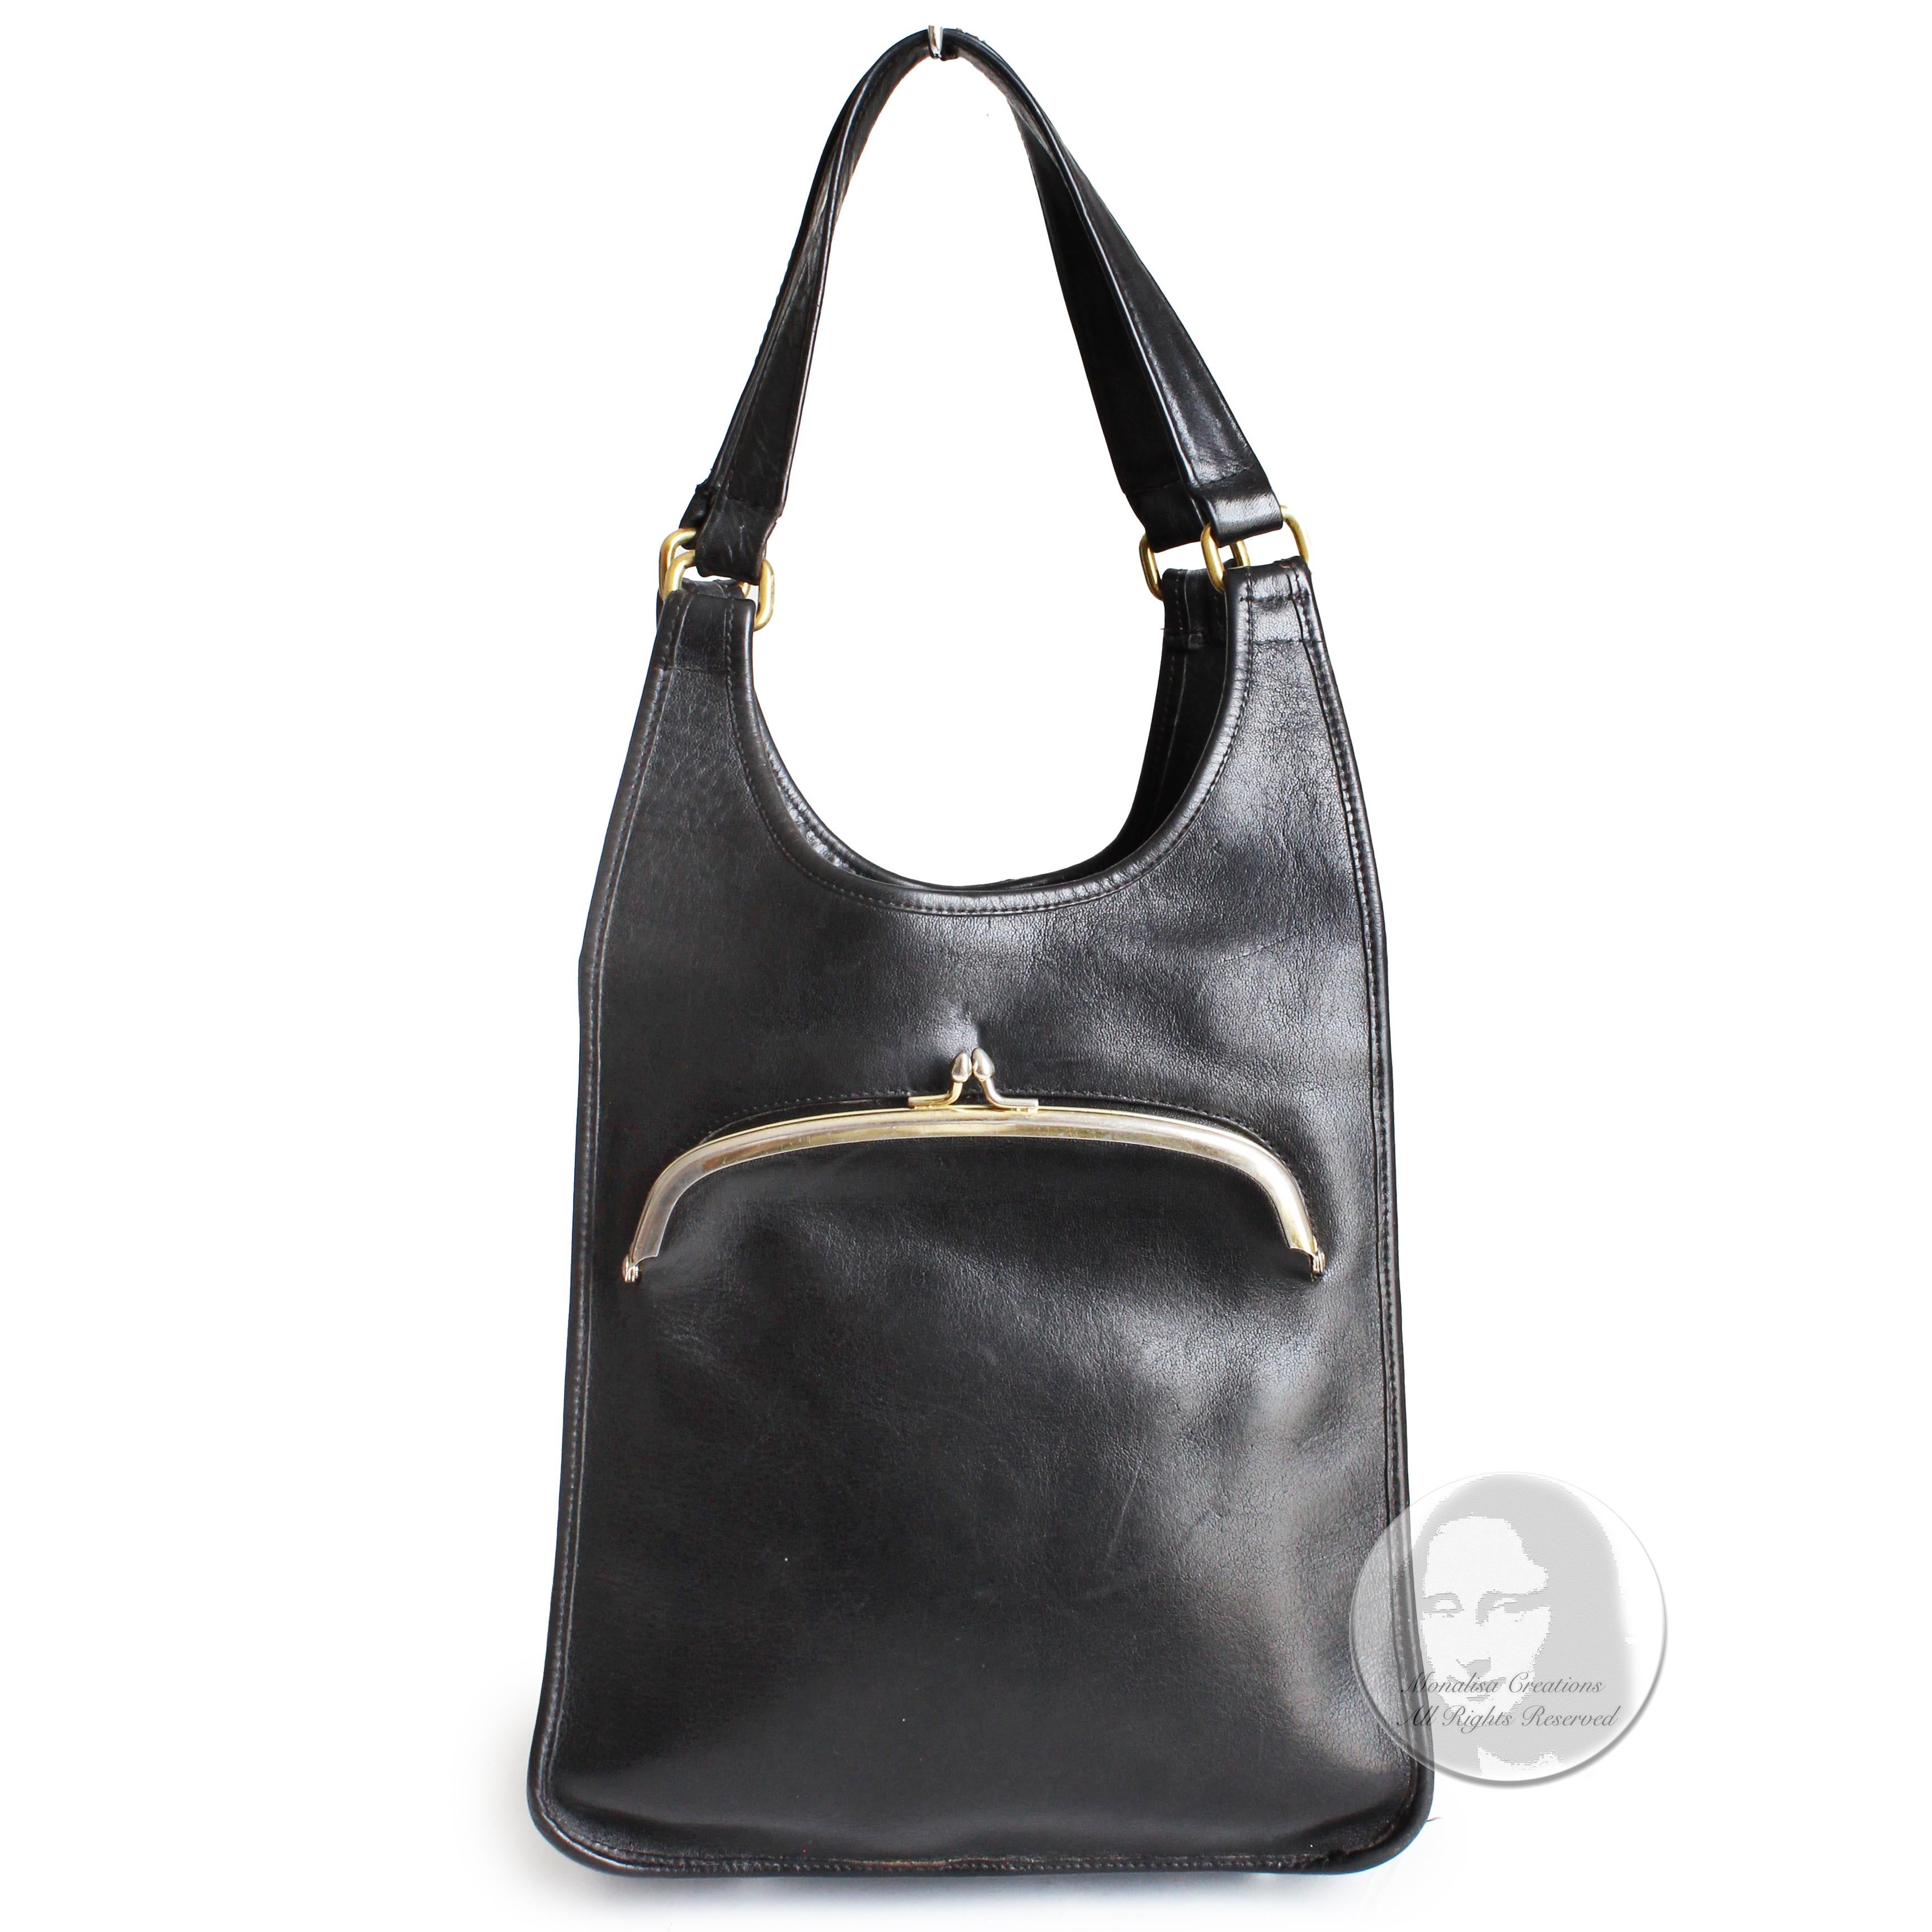 Preowned, vintage Bonnie Cashin for Coach kiss lock tote bag, likely made in the 1960s. Made from black leather, it features a kiss lock coin purse in front, and an open main compartment that's lined in Bonnie's signature striped fabric with one